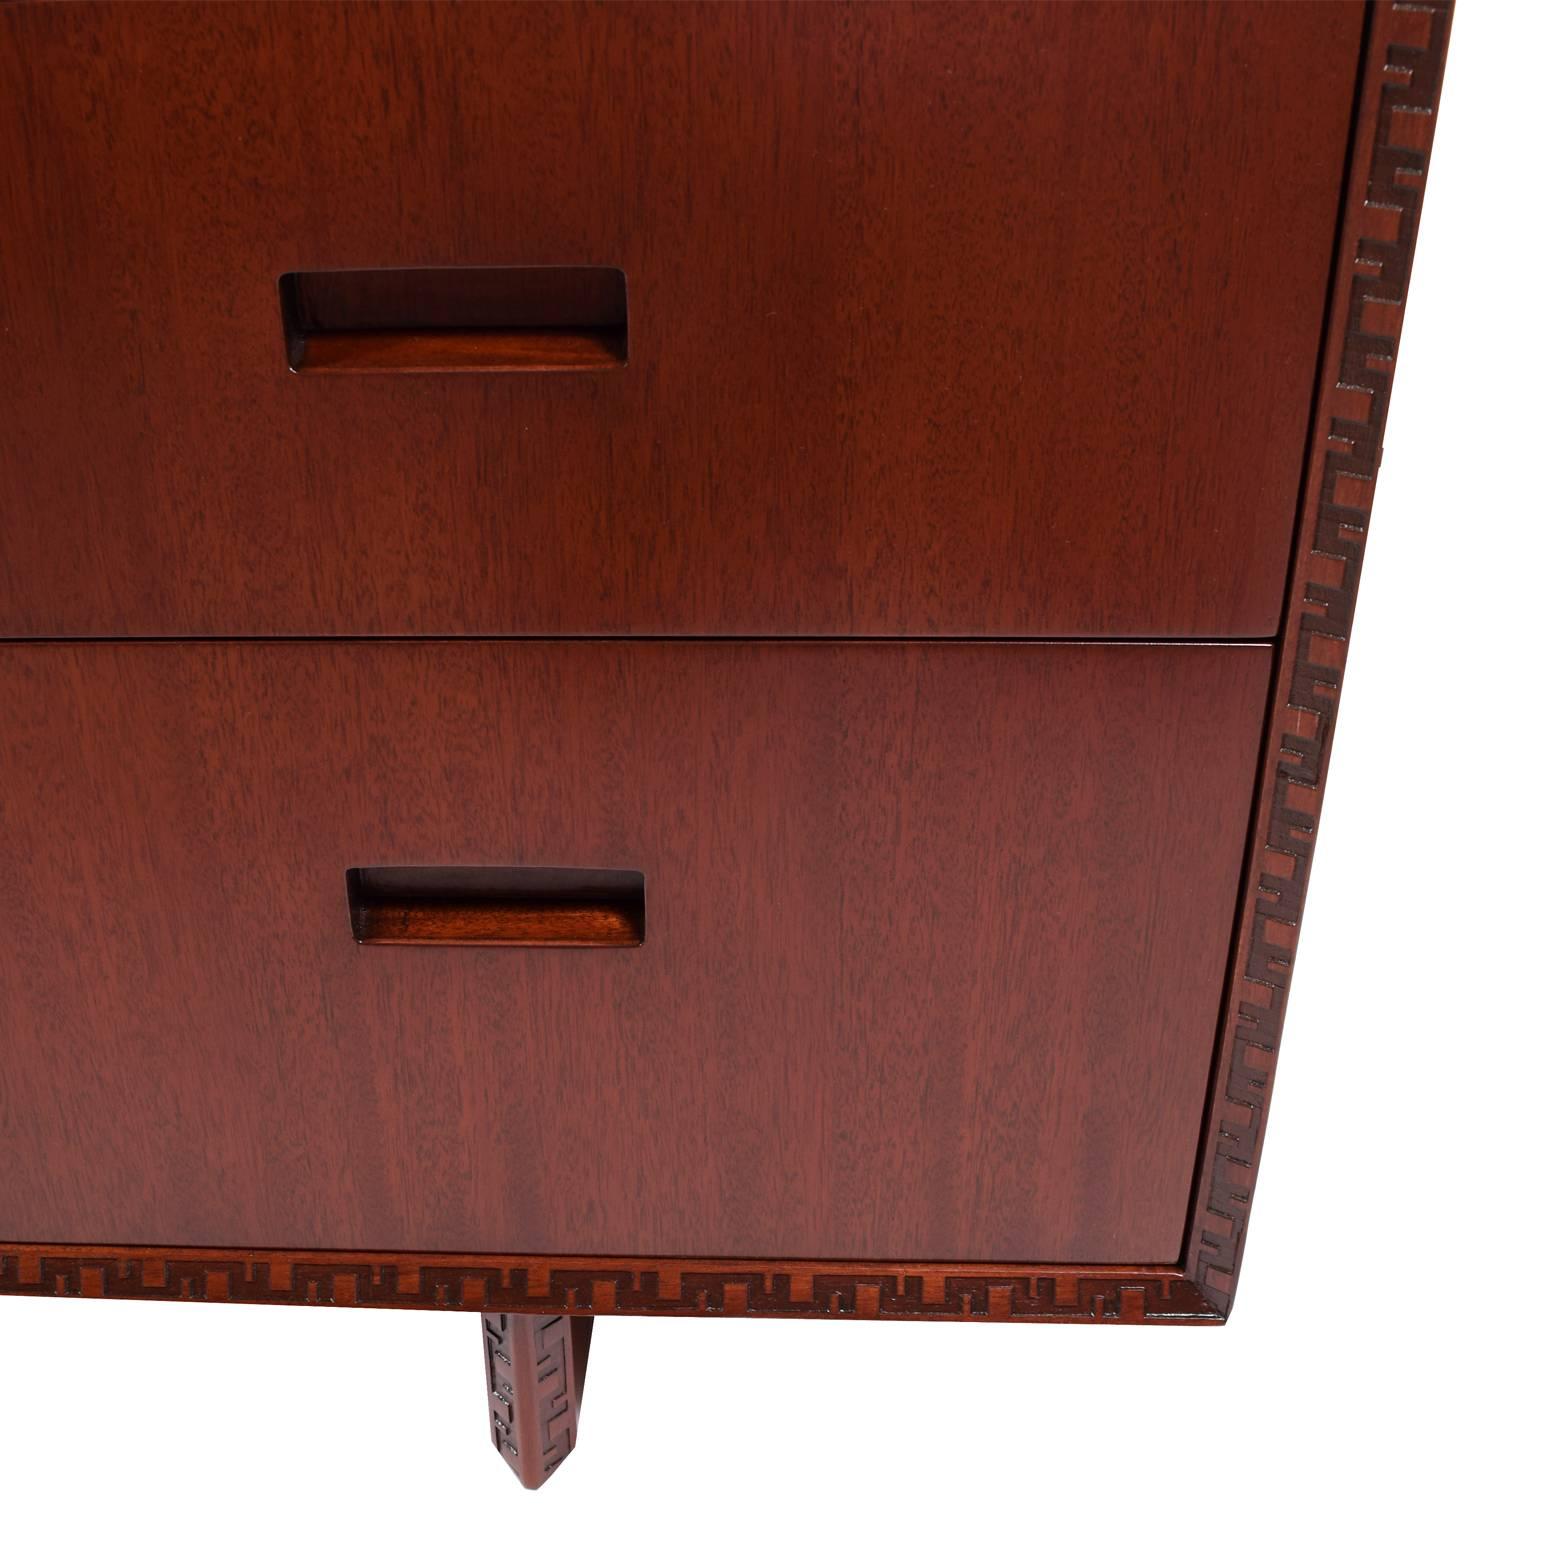 Mid-20th Century Chest of Drawers with Shelf by Frank Lloyd Wright